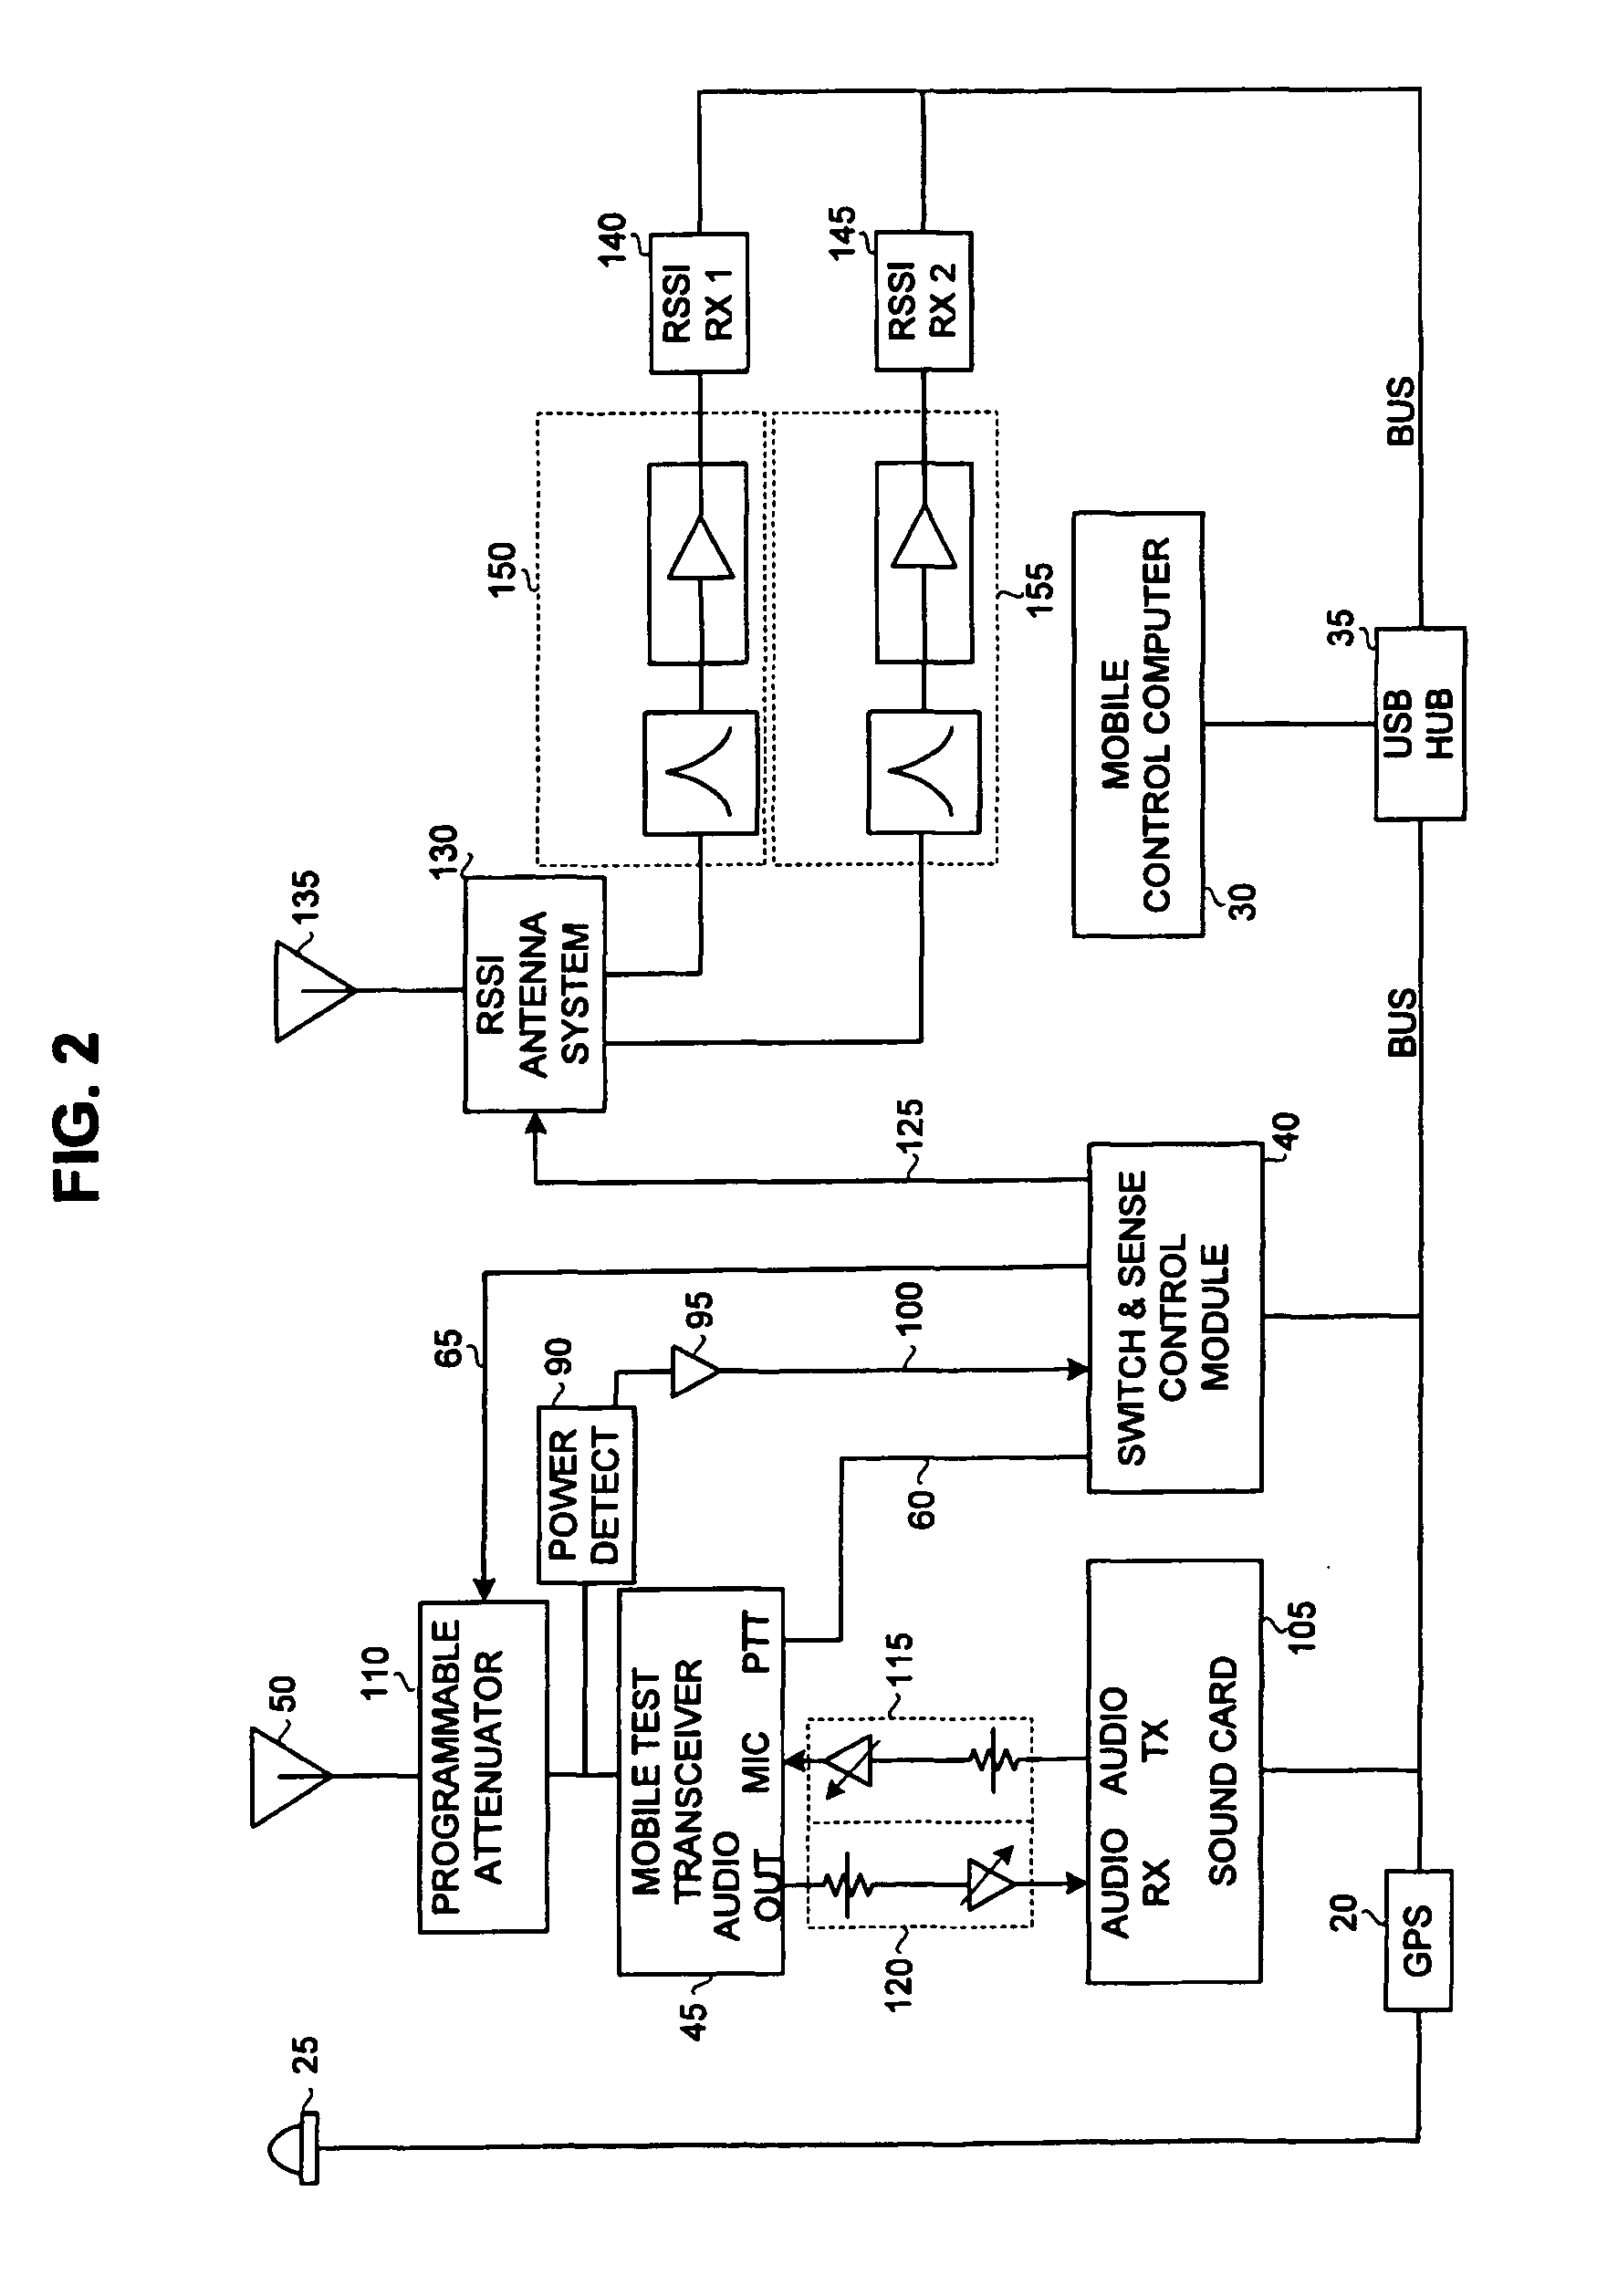 Method and System for Evaluating Radio Coverage